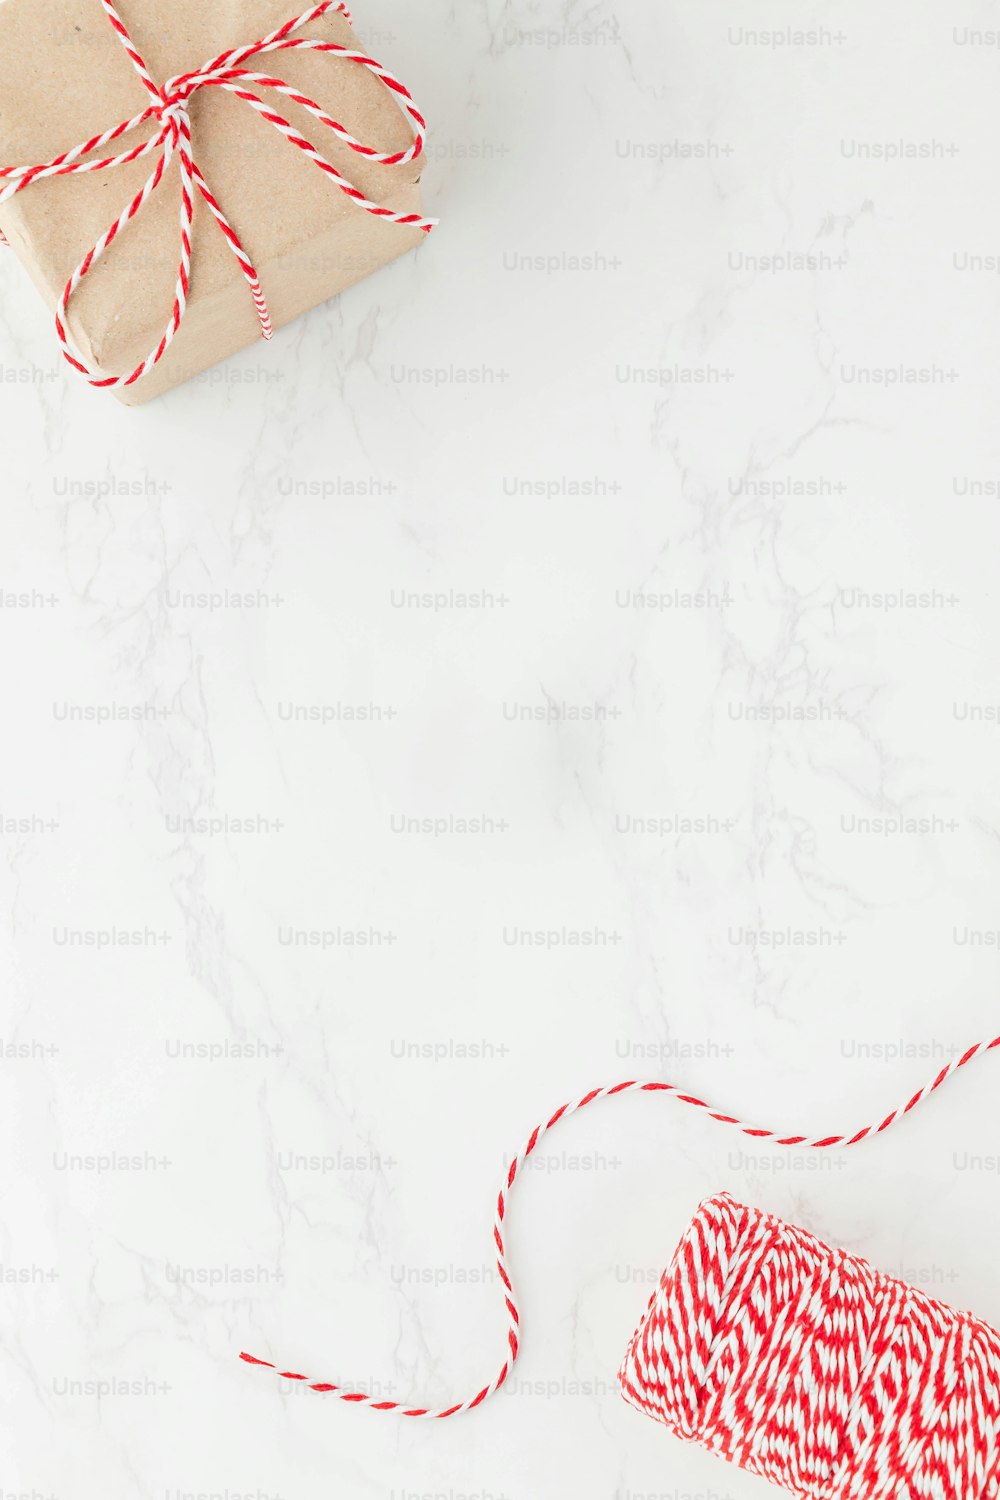 Red String Pictures  Download Free Images on Unsplash